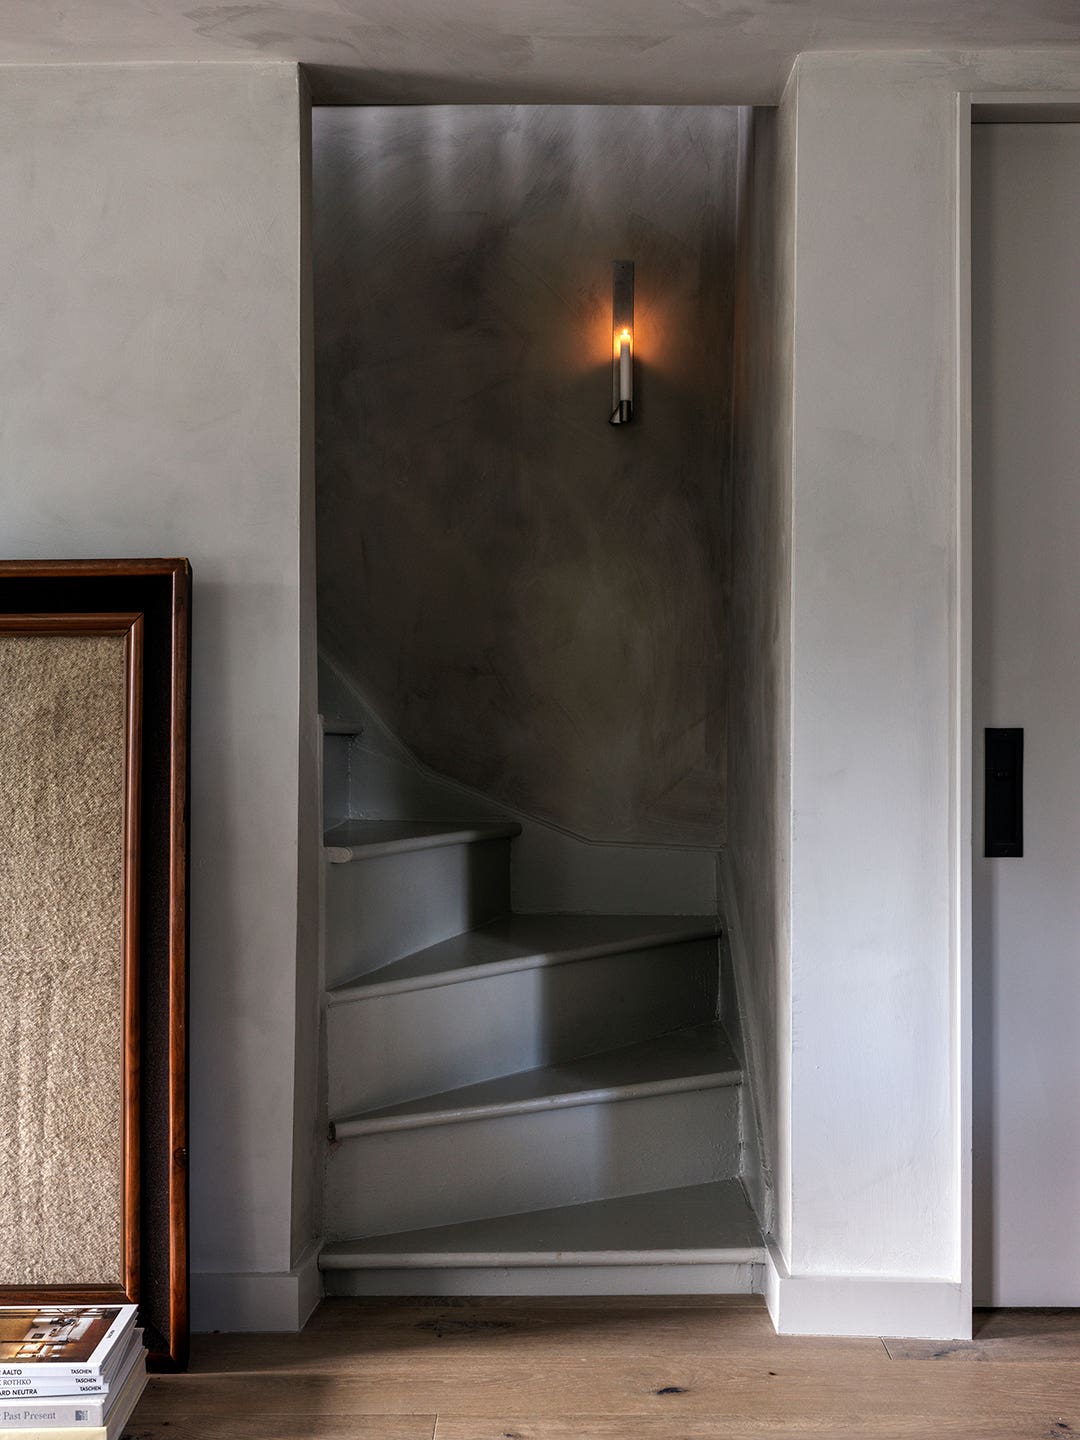 Narnia Who? This Cottage’s Attic Doors Reveal a Dramatic Marble Shower